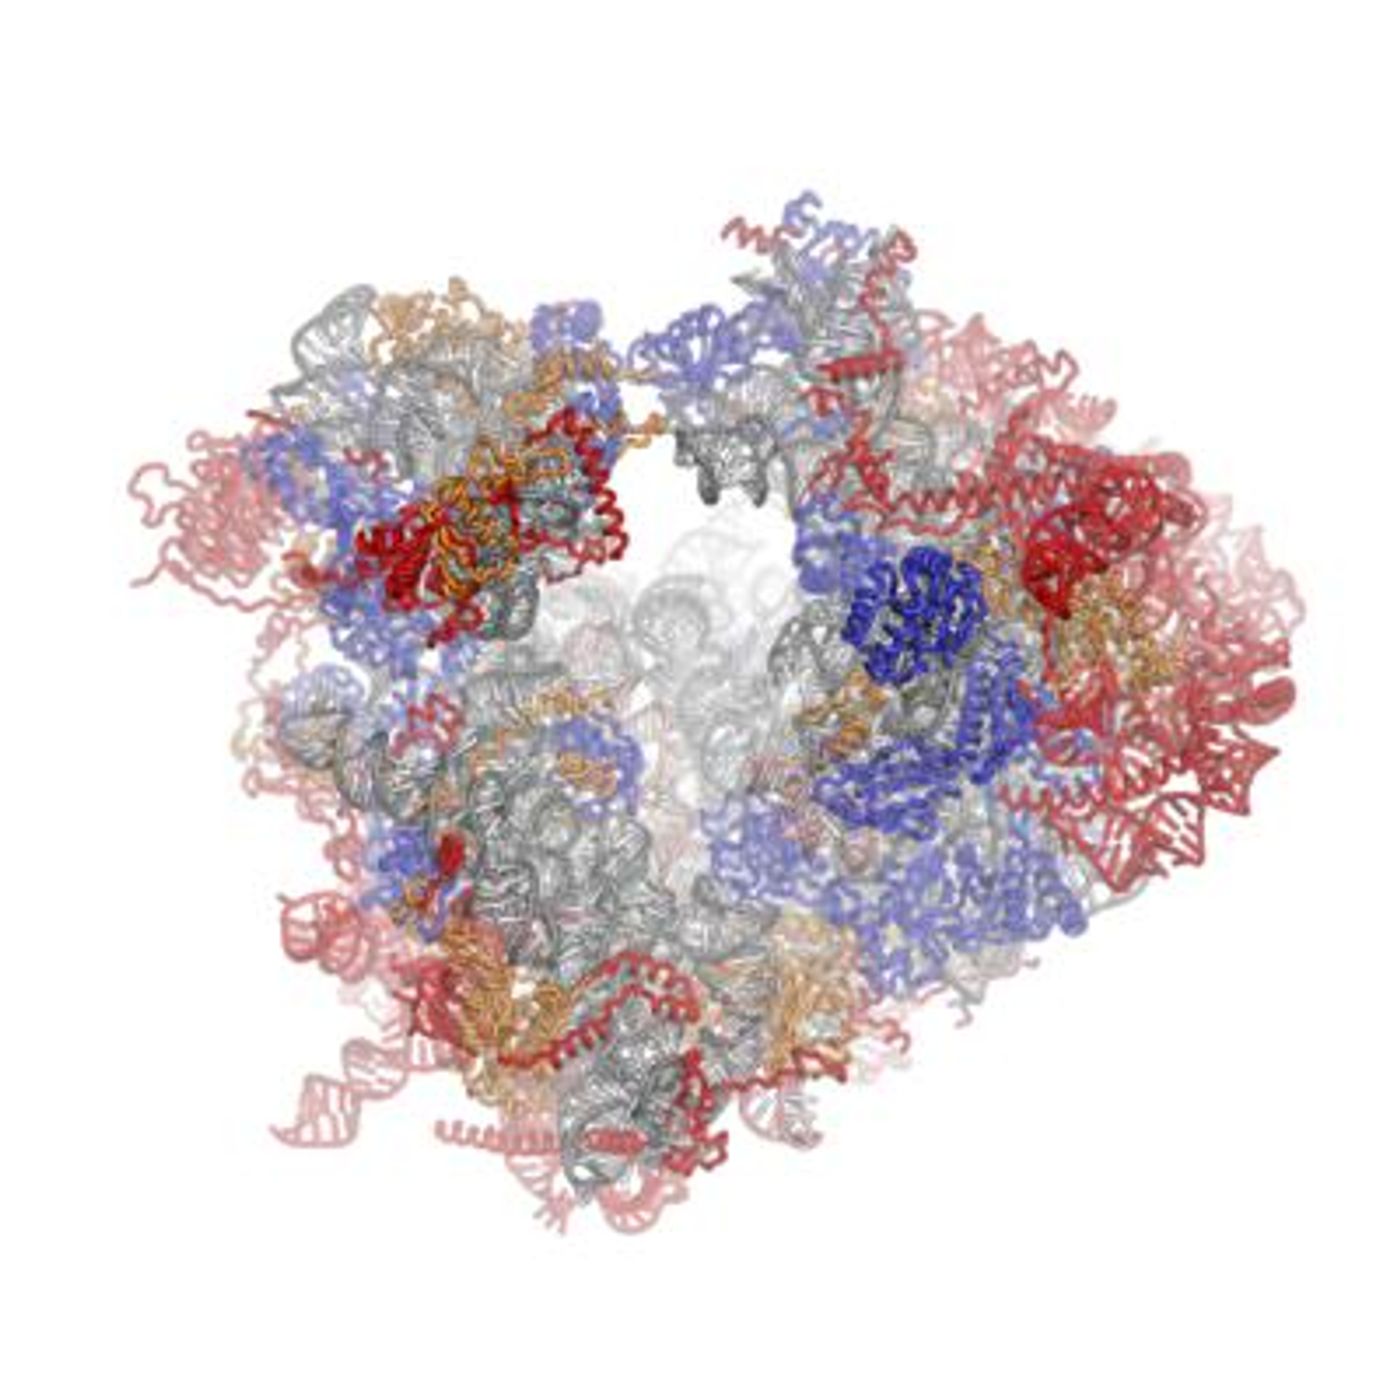 The ribosomal RNA (rRNA) core is represented as a grey tube, expansion segments are shown in red. Universally conserved proteins are shown in blue. / Credit: Wikimedia Commons/Fvoigtsh